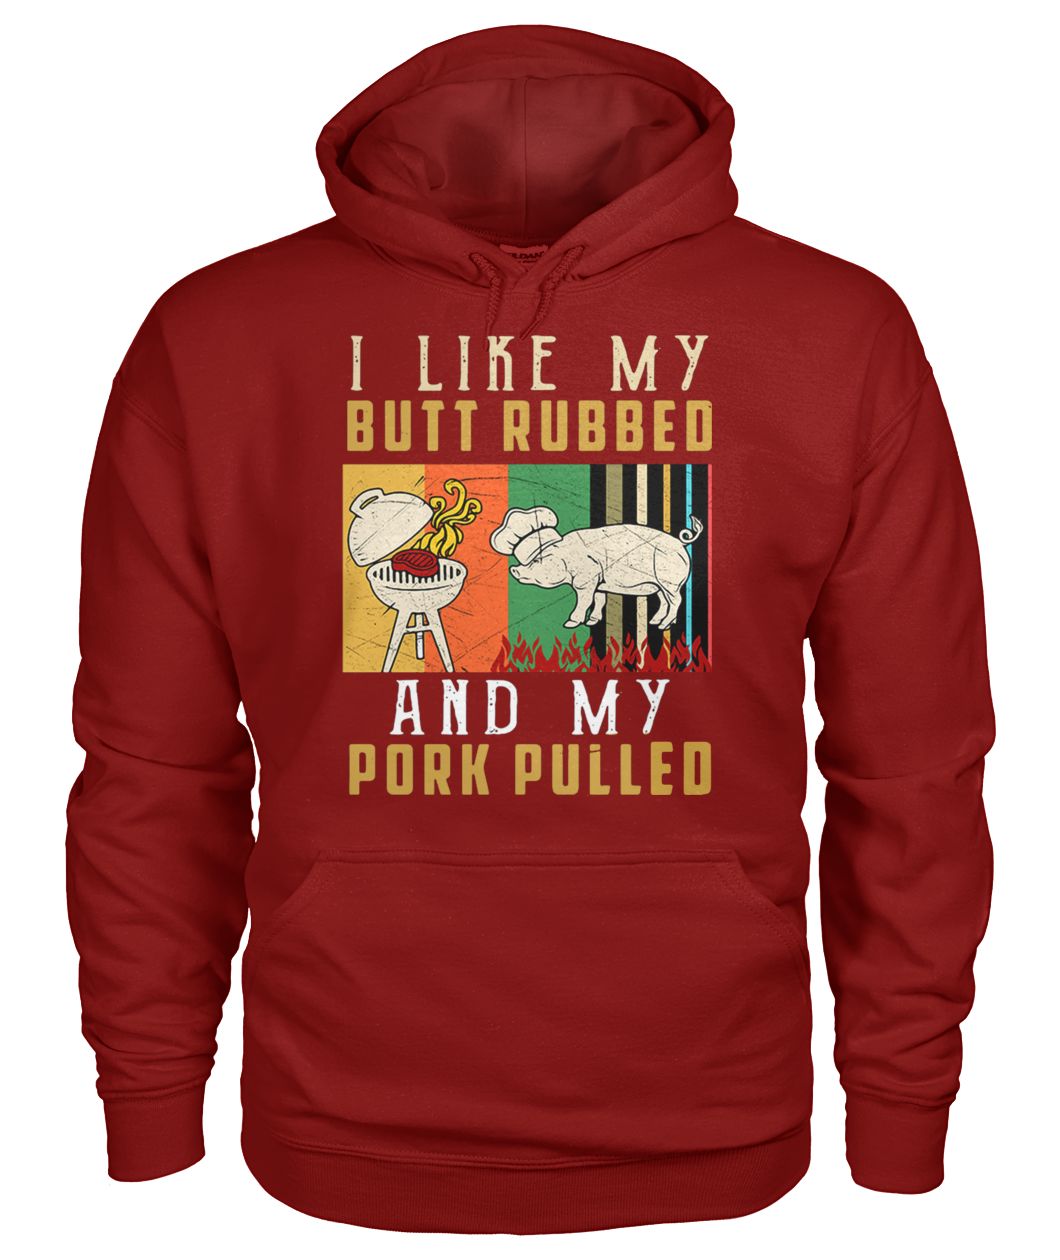 I like my butt rubbed and my pork pulled gildan hoodie